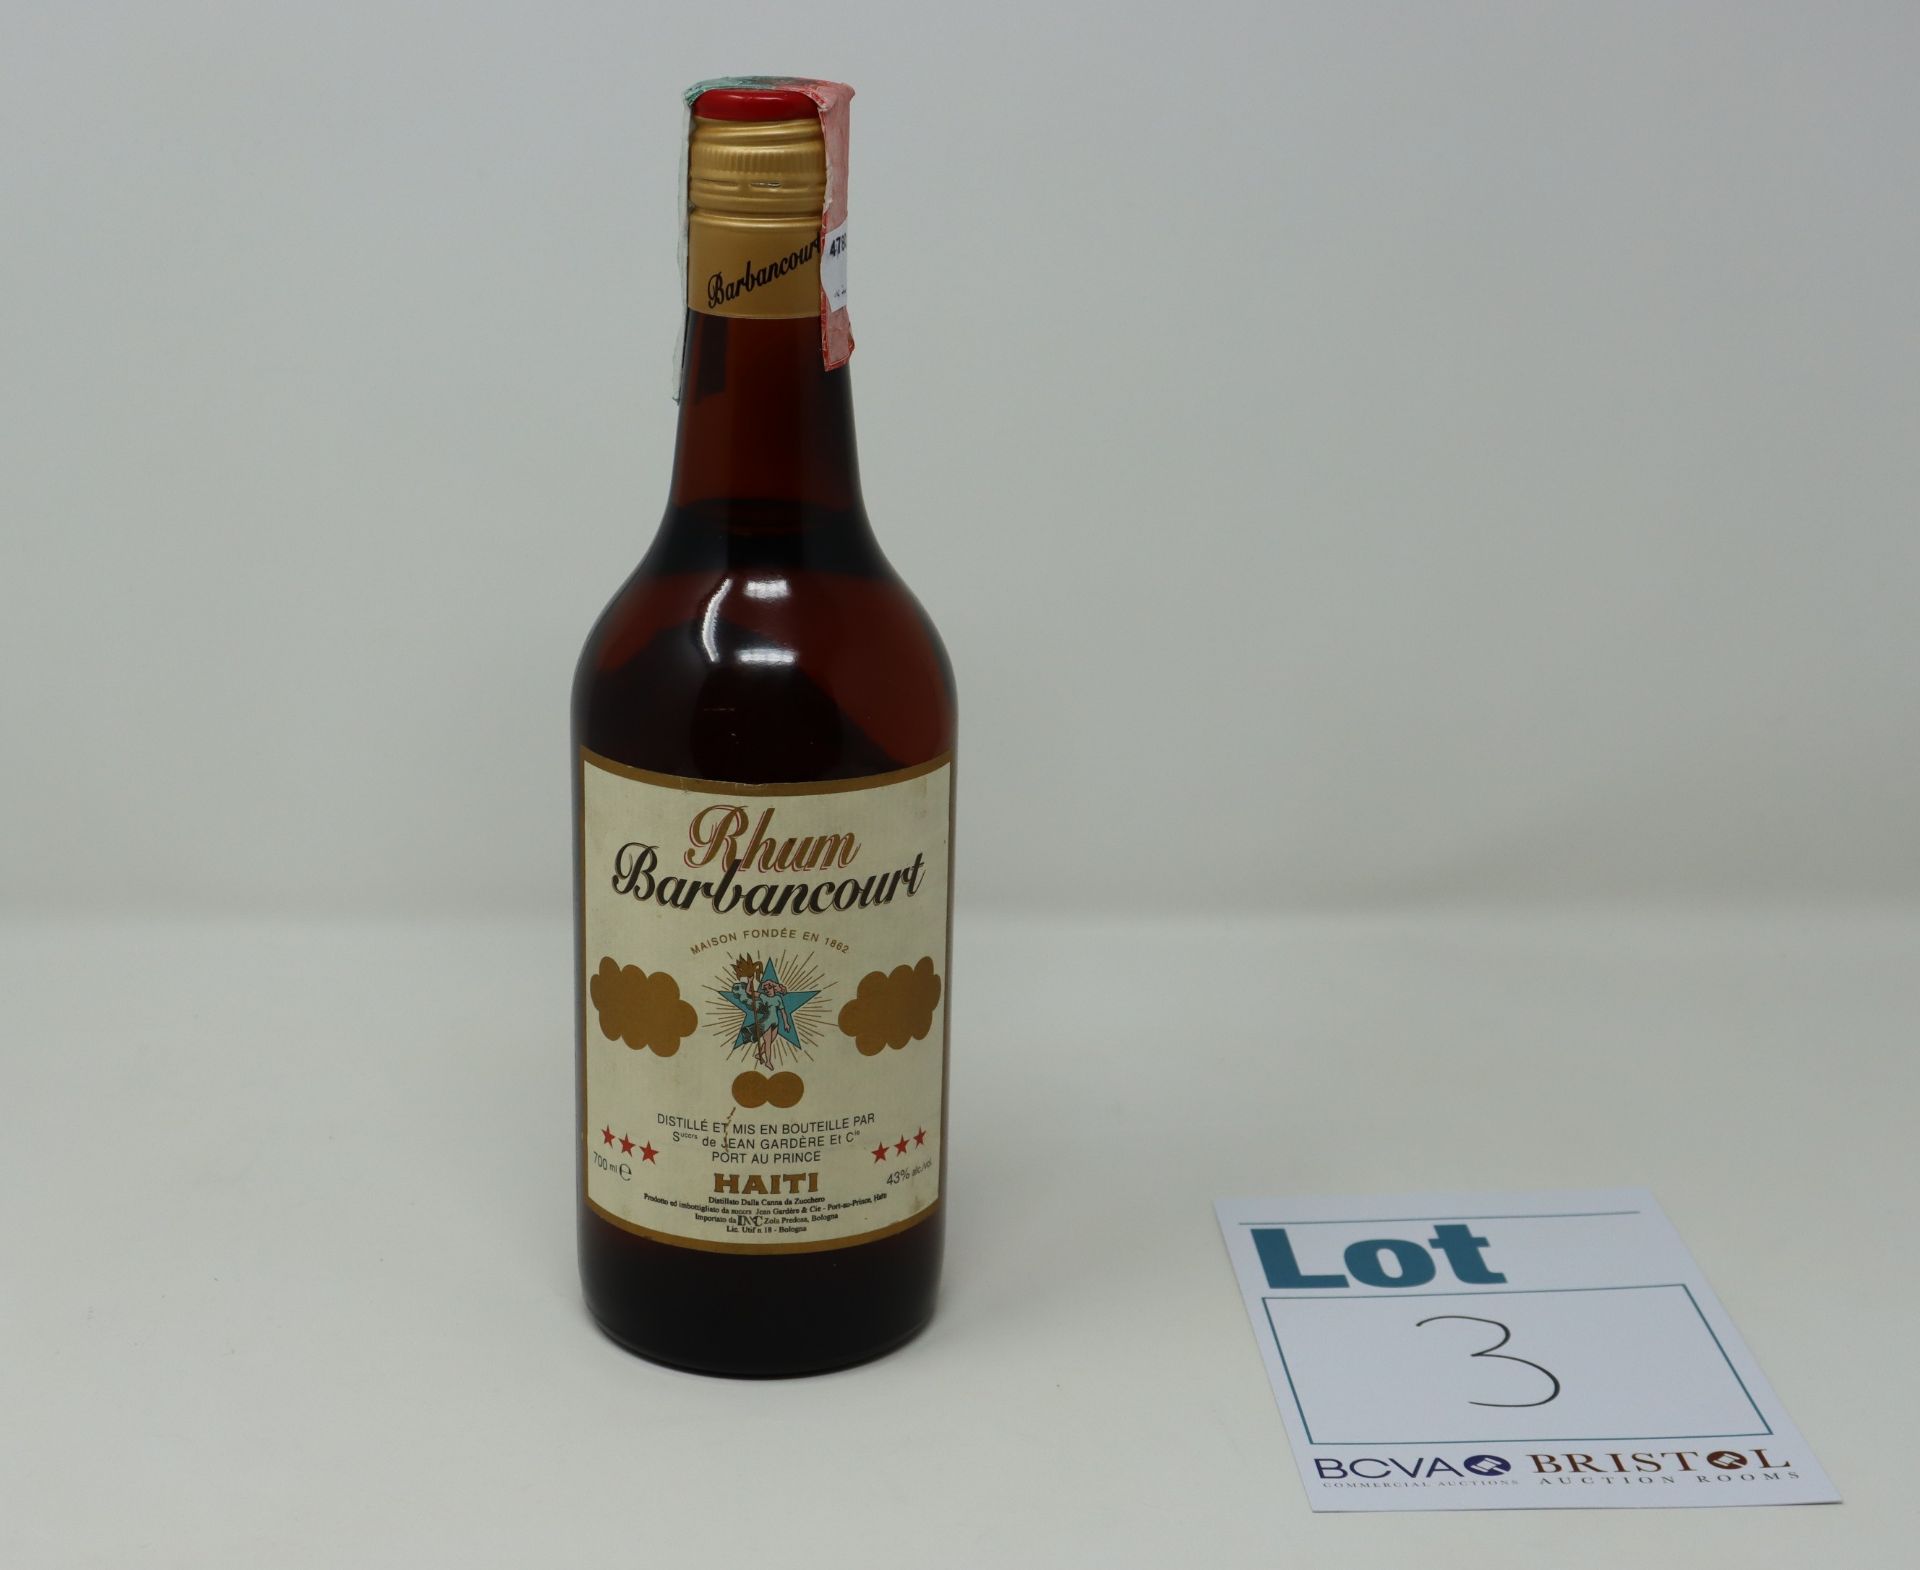 A bottle of Barbancourt Haiti 3 Star Rum 700ml (Over 18s only).